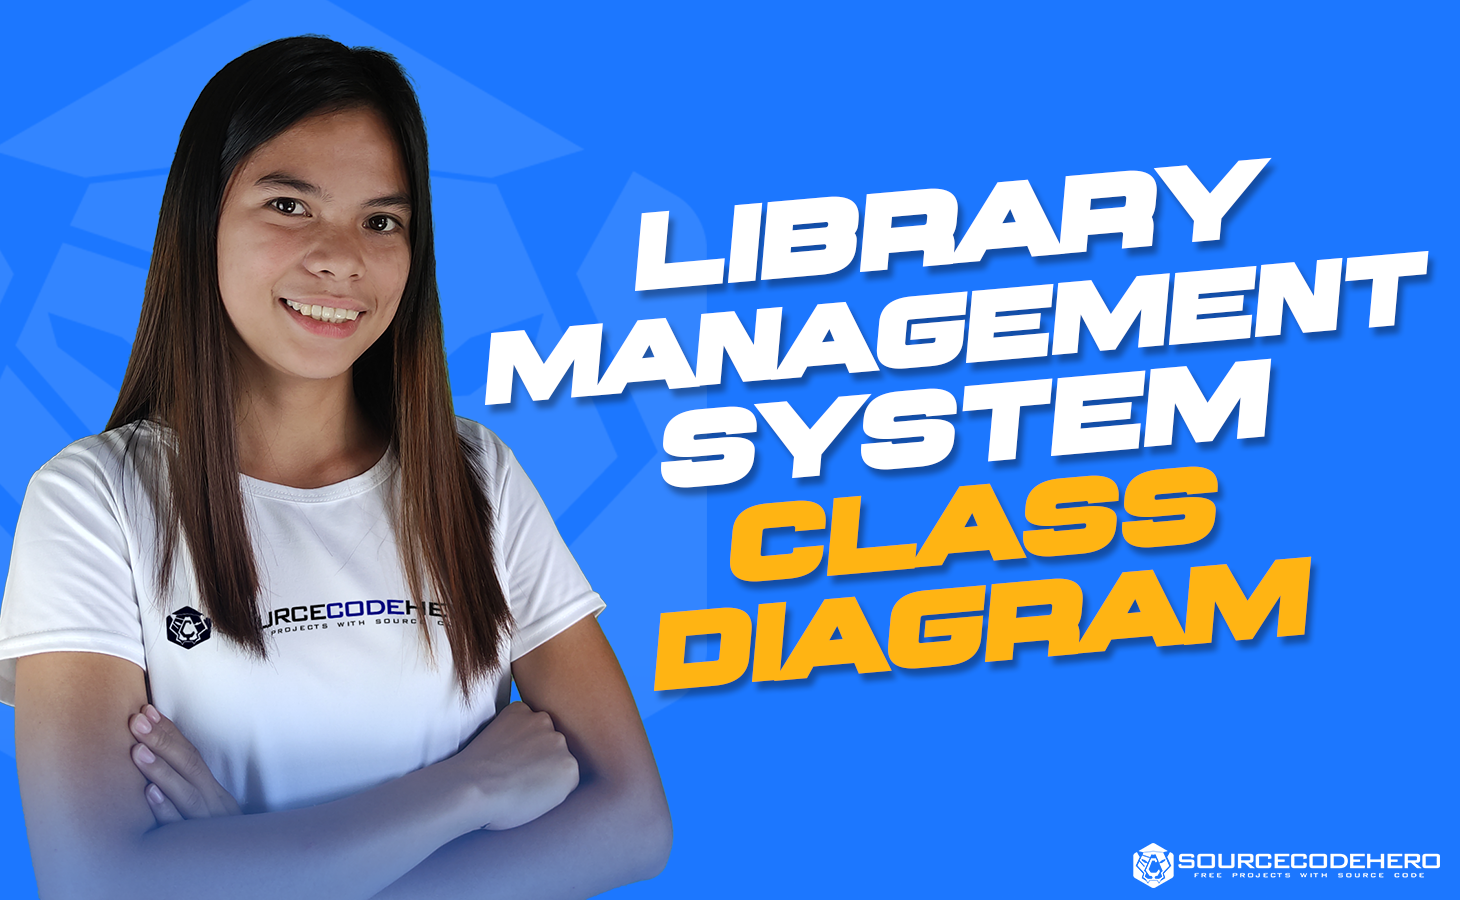 free-library-management-software-library-management-softw-flickr